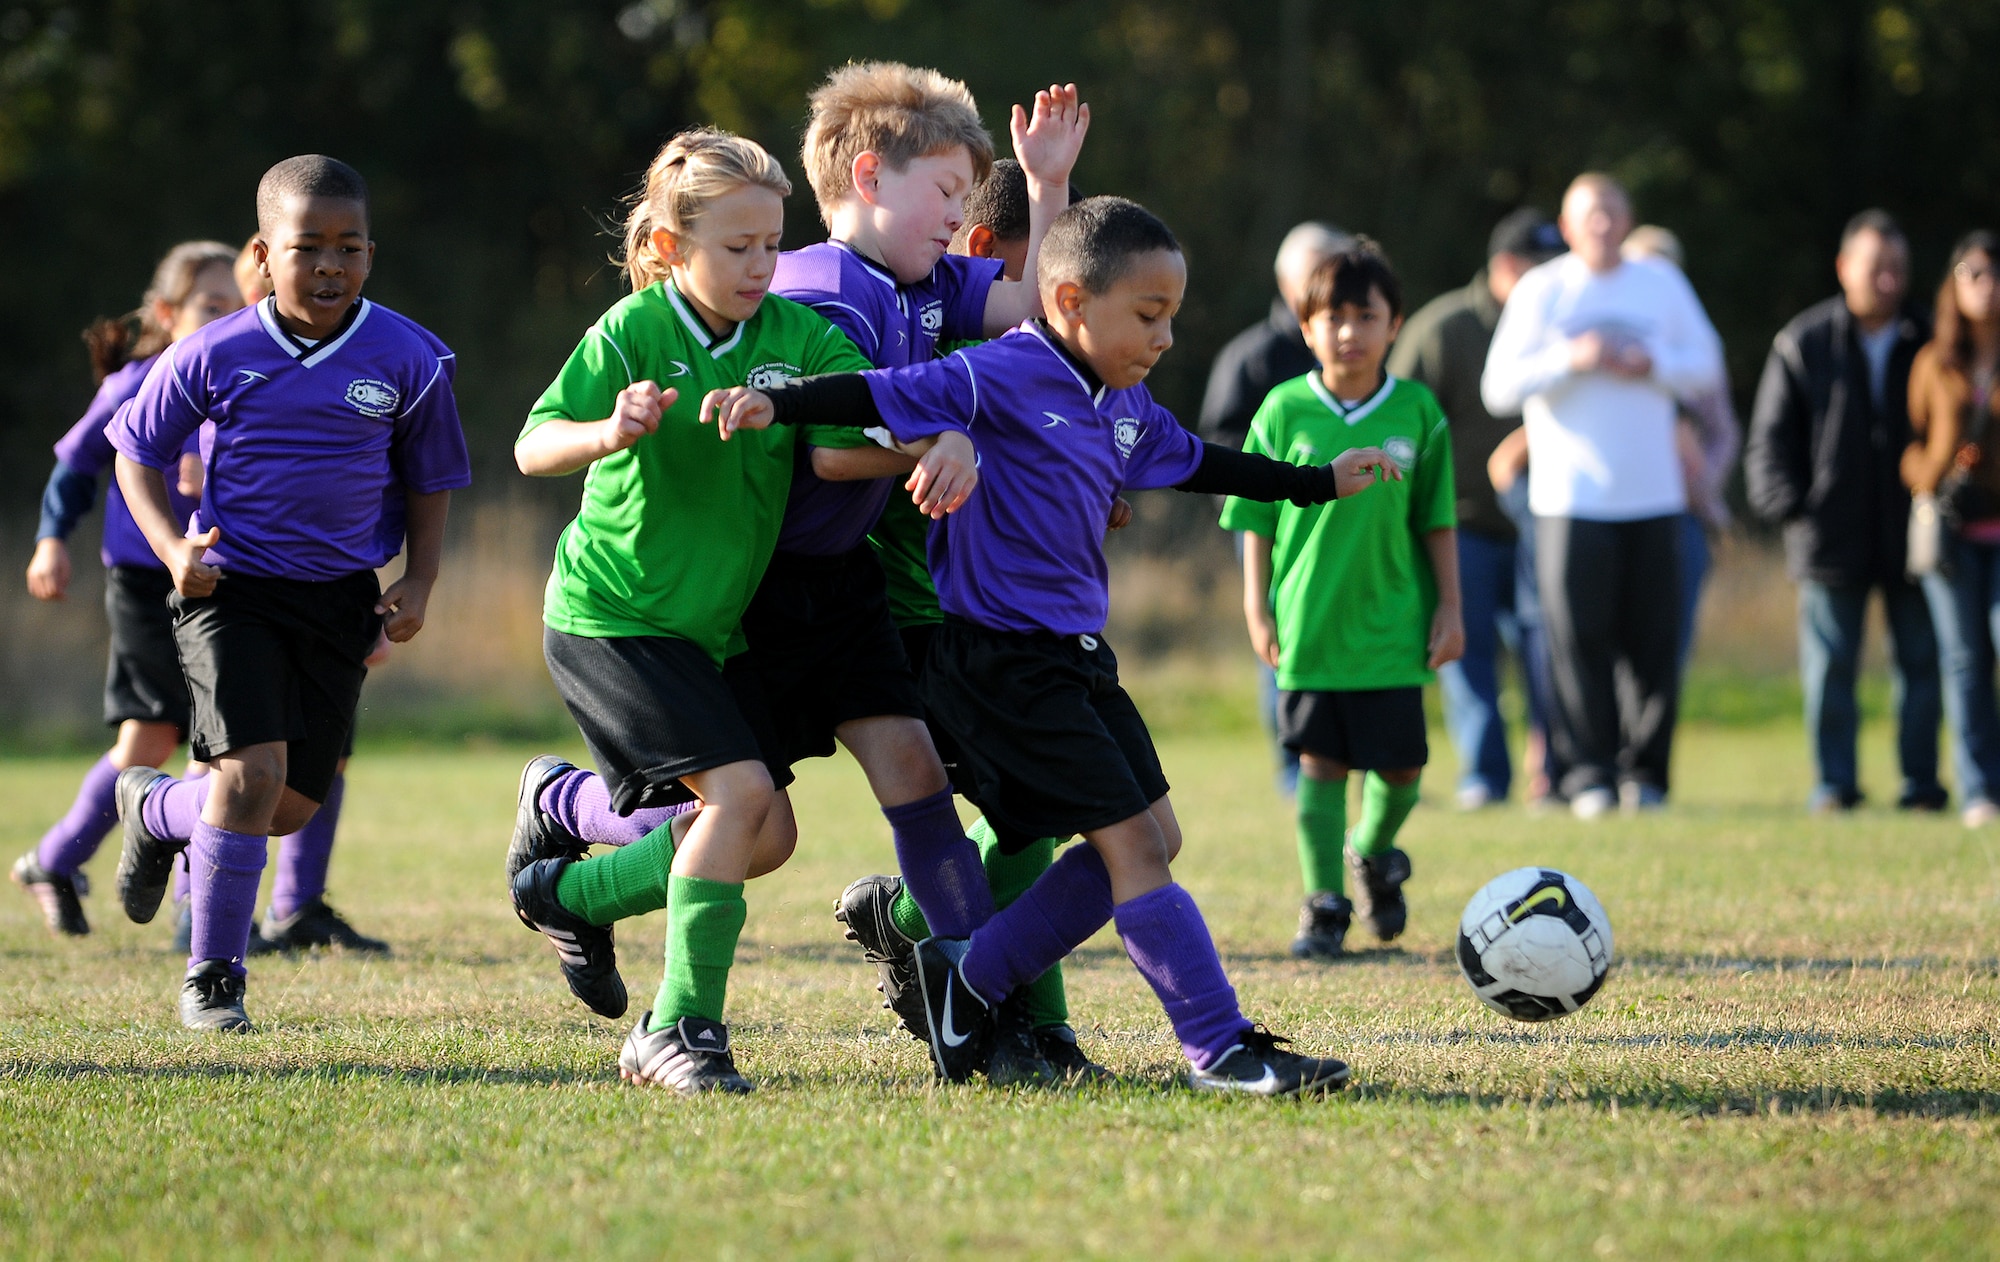 SPANGDAHLEM AIR BASE, Germany -- Members of the Sabers (green) and Galaxy (purple) race after the soccer ball during a youth soccer game on Spangdahlem’s soccer fields Sept. 26. The youth soccer season started Aug. 24. and runs until Oct. 24. (U.S. Air Force photo/Airman 1st Class Nathanael Callon)